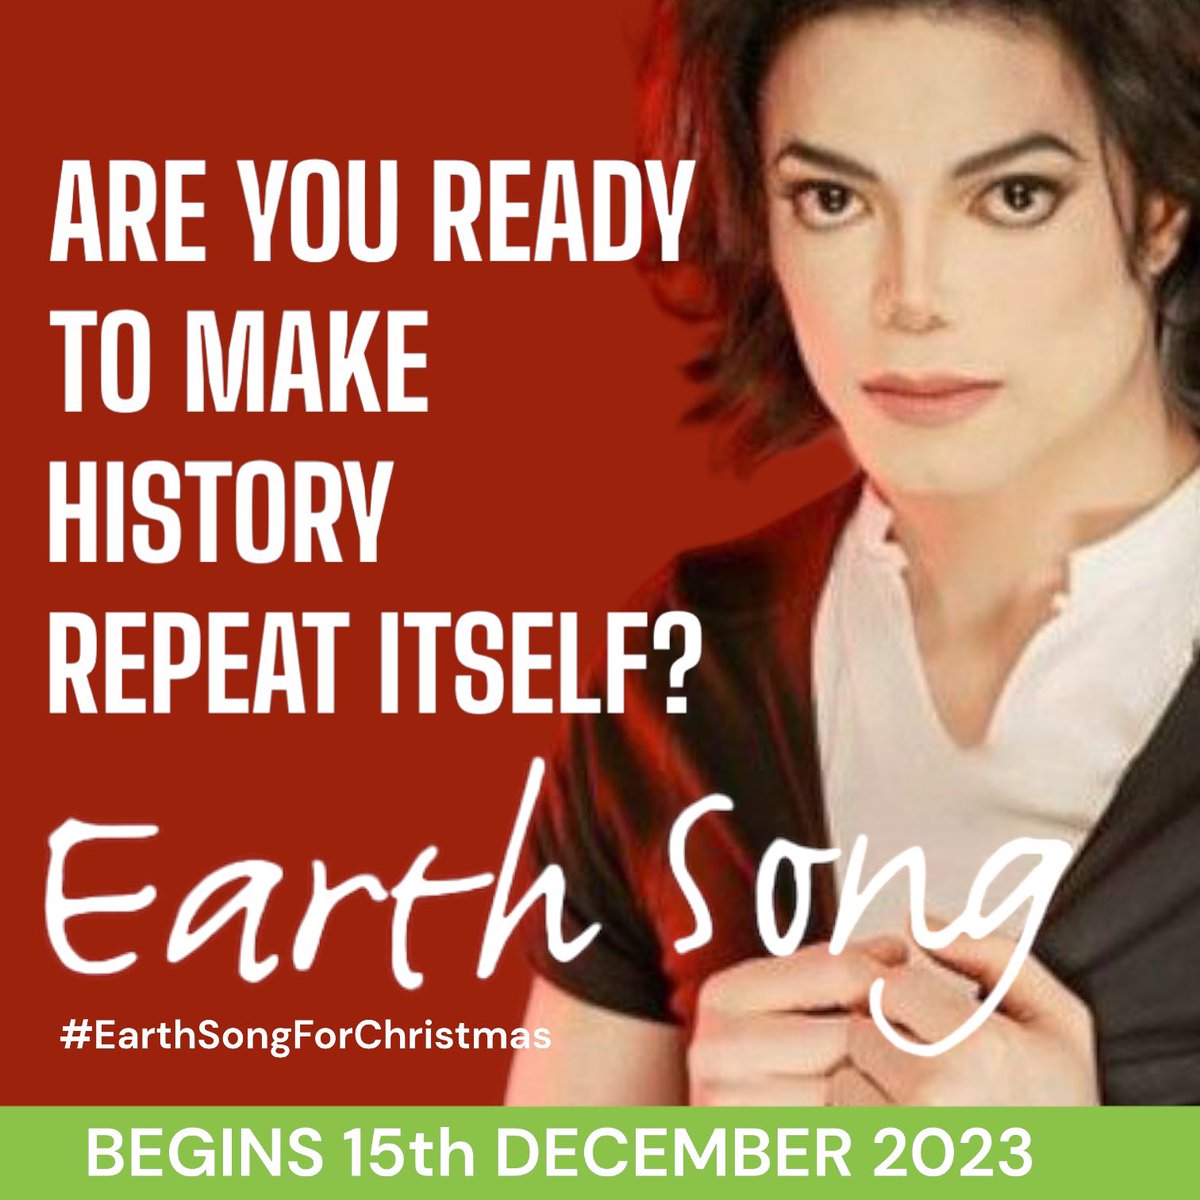 Join in the #campaign to make #EarthSong #chart again this #Christmas! #Share the hashtag #EarthSongForChristmas and raise awareness of the campaign throughout the #MichaelJackson #community. Five days to go! #MJ #MJJ #MJFan #MJfam #EarthSong #XmasNo1 #ChristmasNumberOne